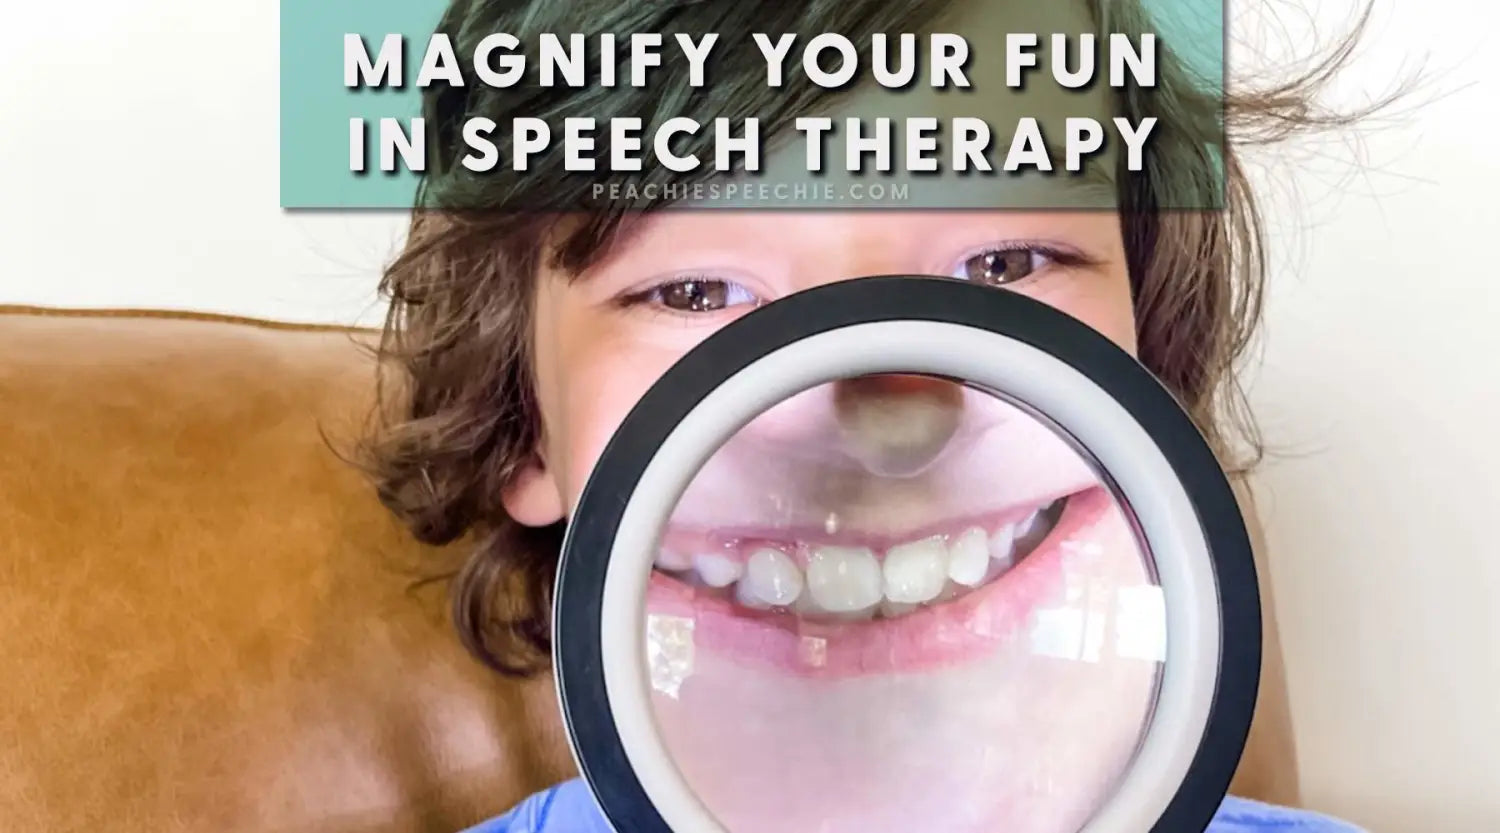 Magnify Your Fun in Speech Therapy